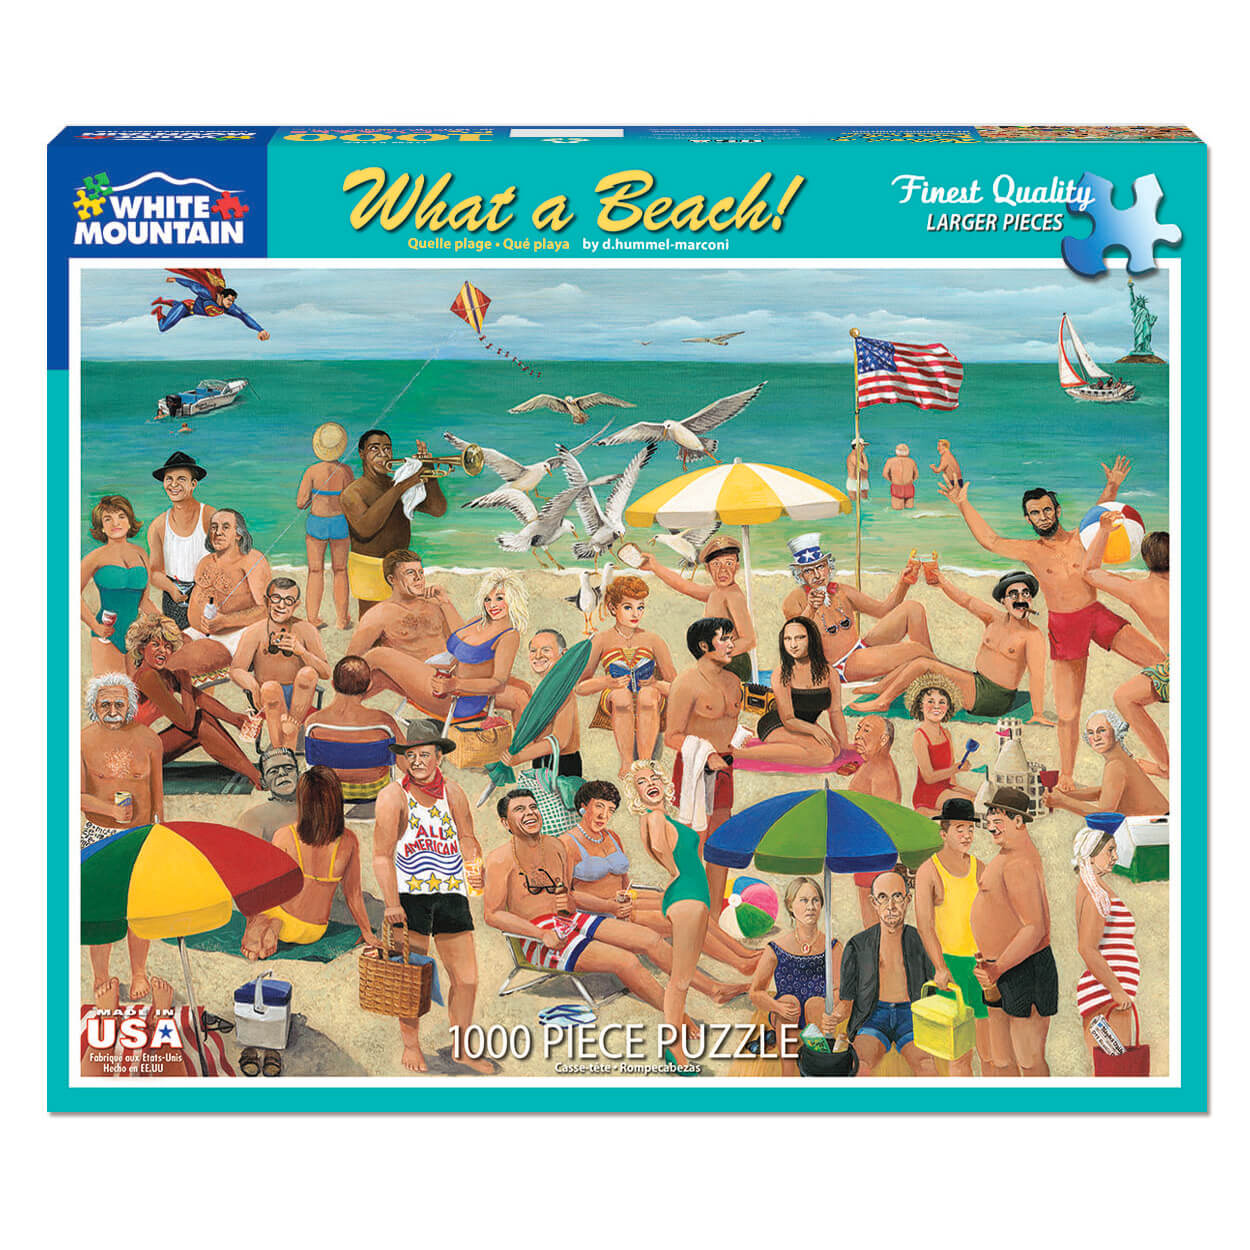 White Mountain Puzzles What a Beach! 1000 Piece Jigsaw Puzzle